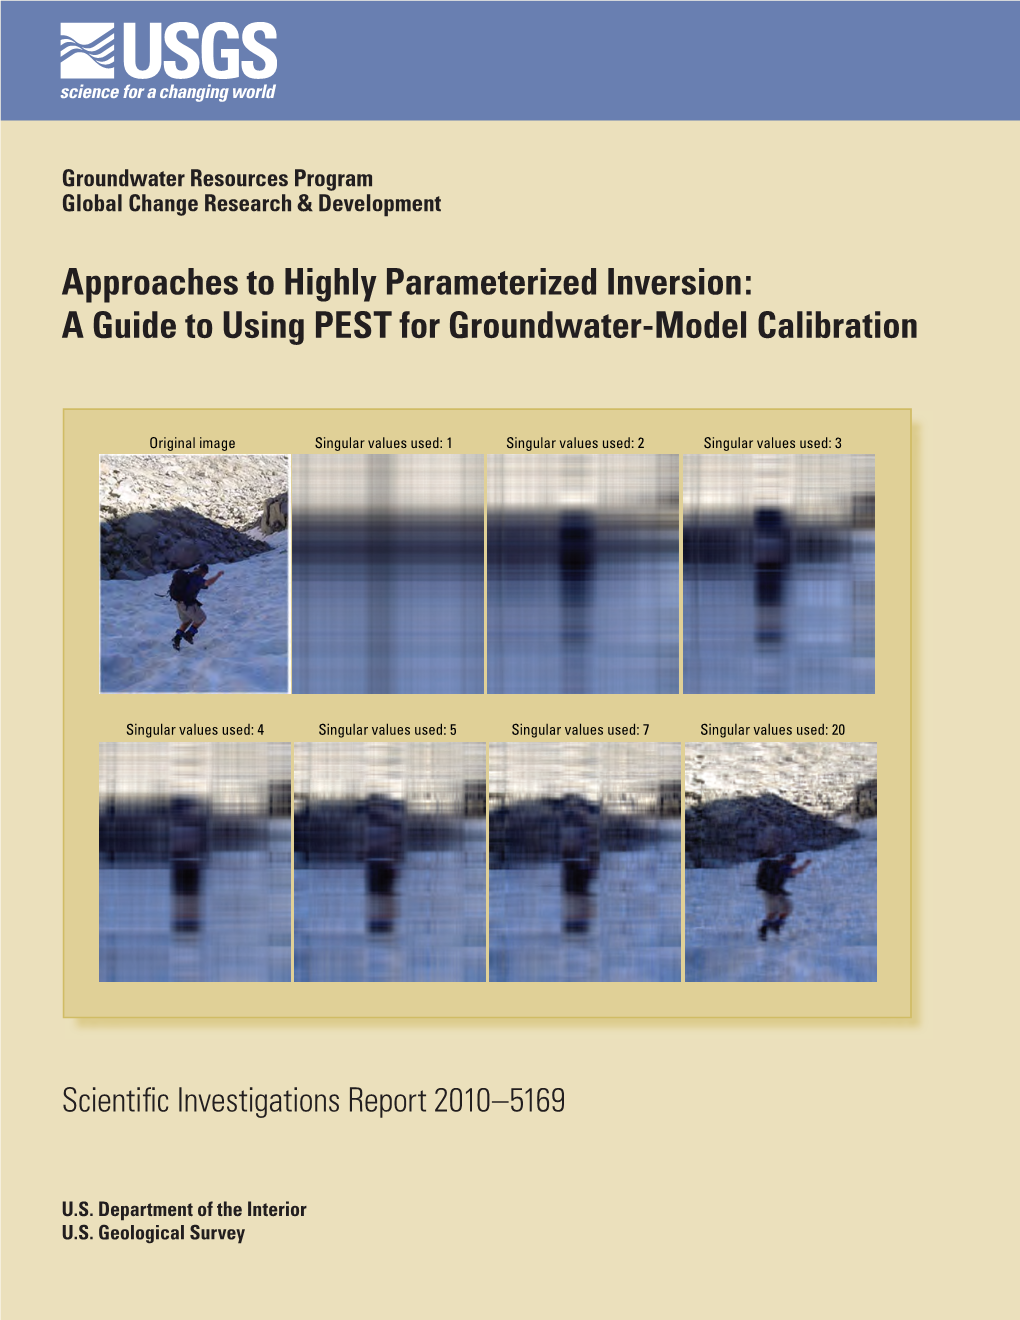 A Guide to Using PEST for Groundwater-Model Calibration